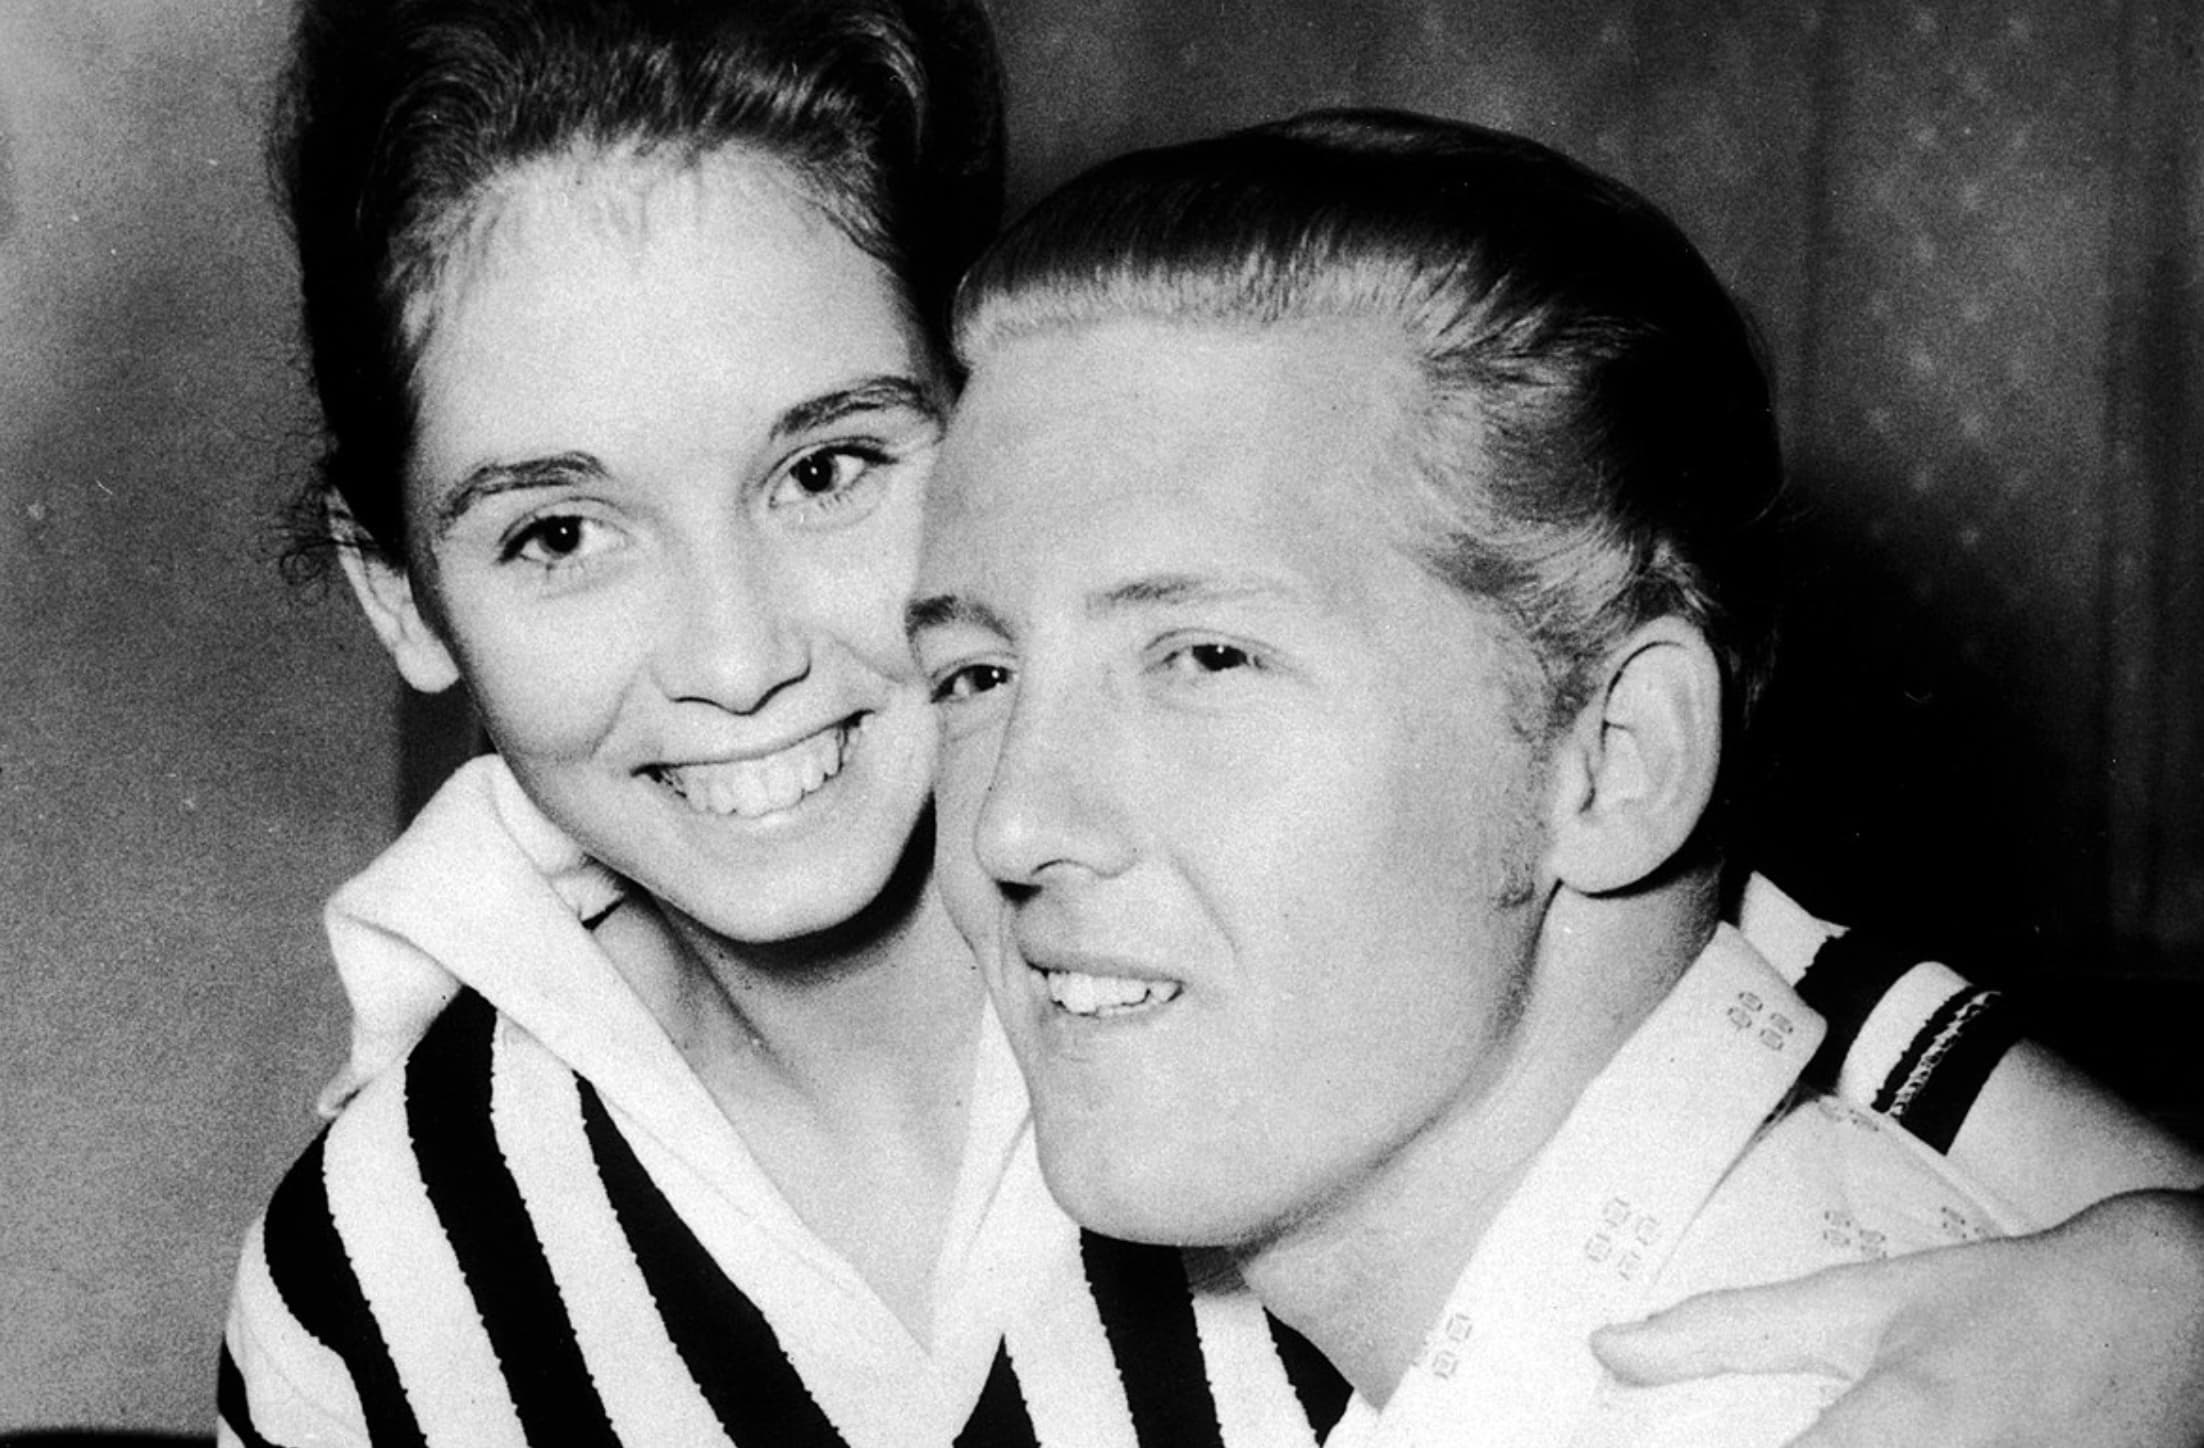 jerry lee lewis married cousin - 00 00 00 049 00